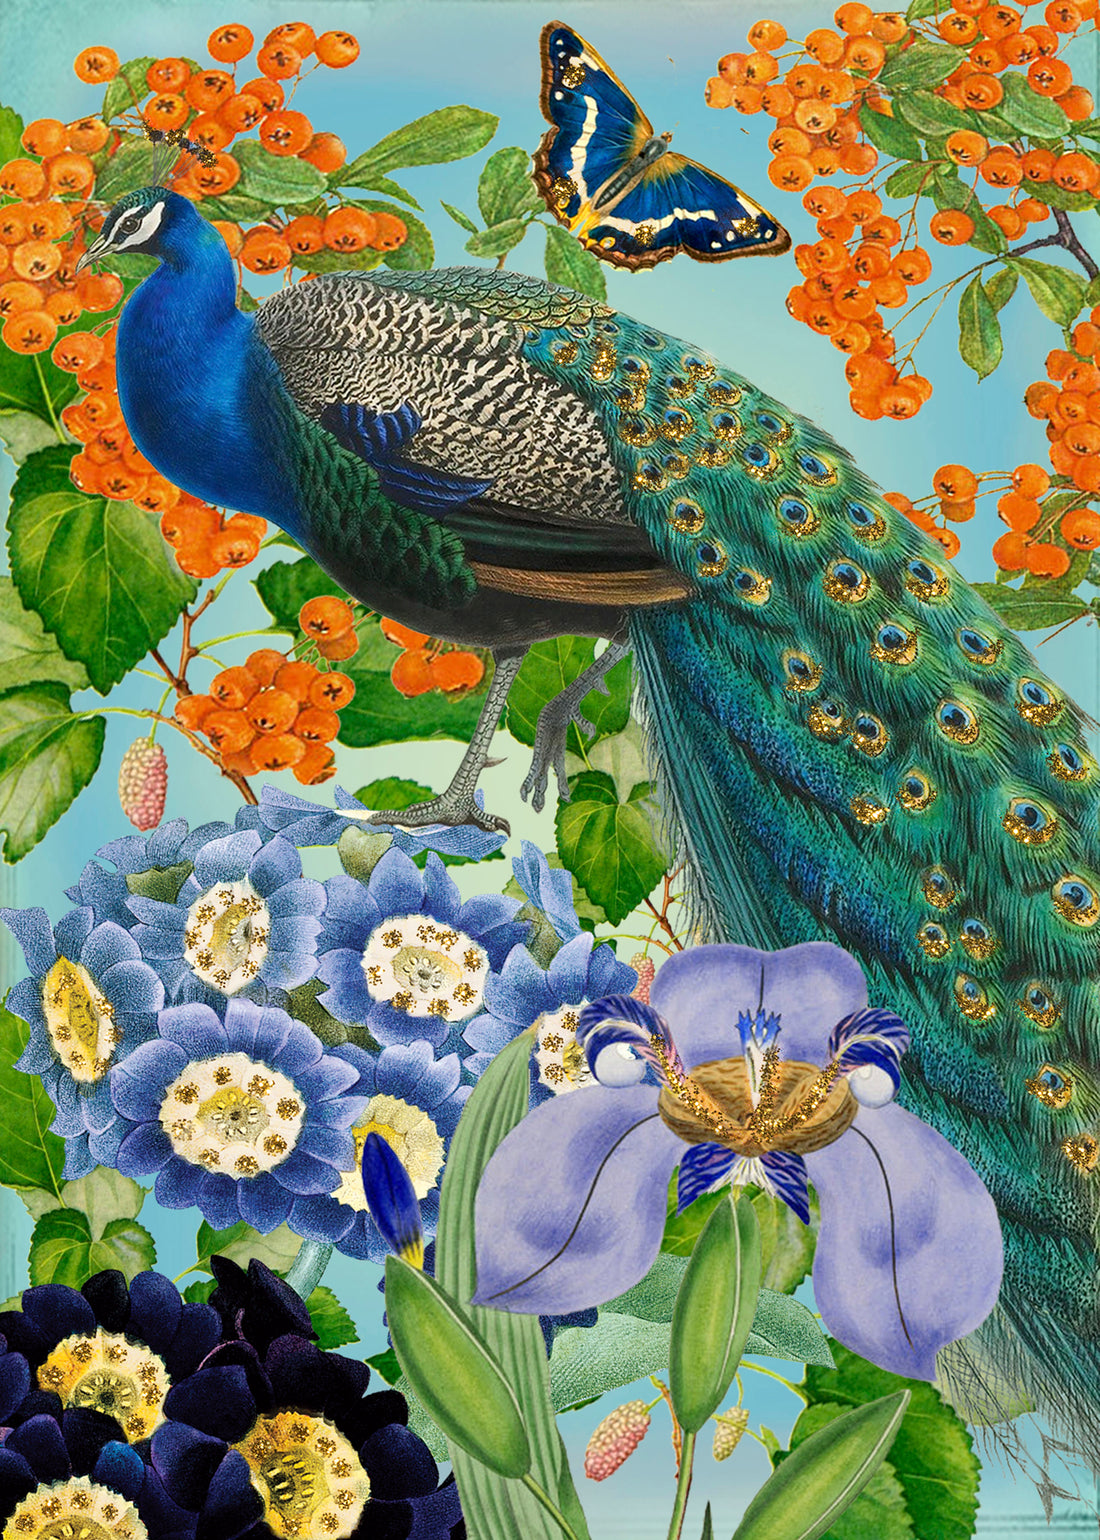 A luxurious Madame Treacle Peacock Glittered Greeting Card featuring a vibrant collage with a peacock design, various flowers, and a butterfly against a blue sky background.